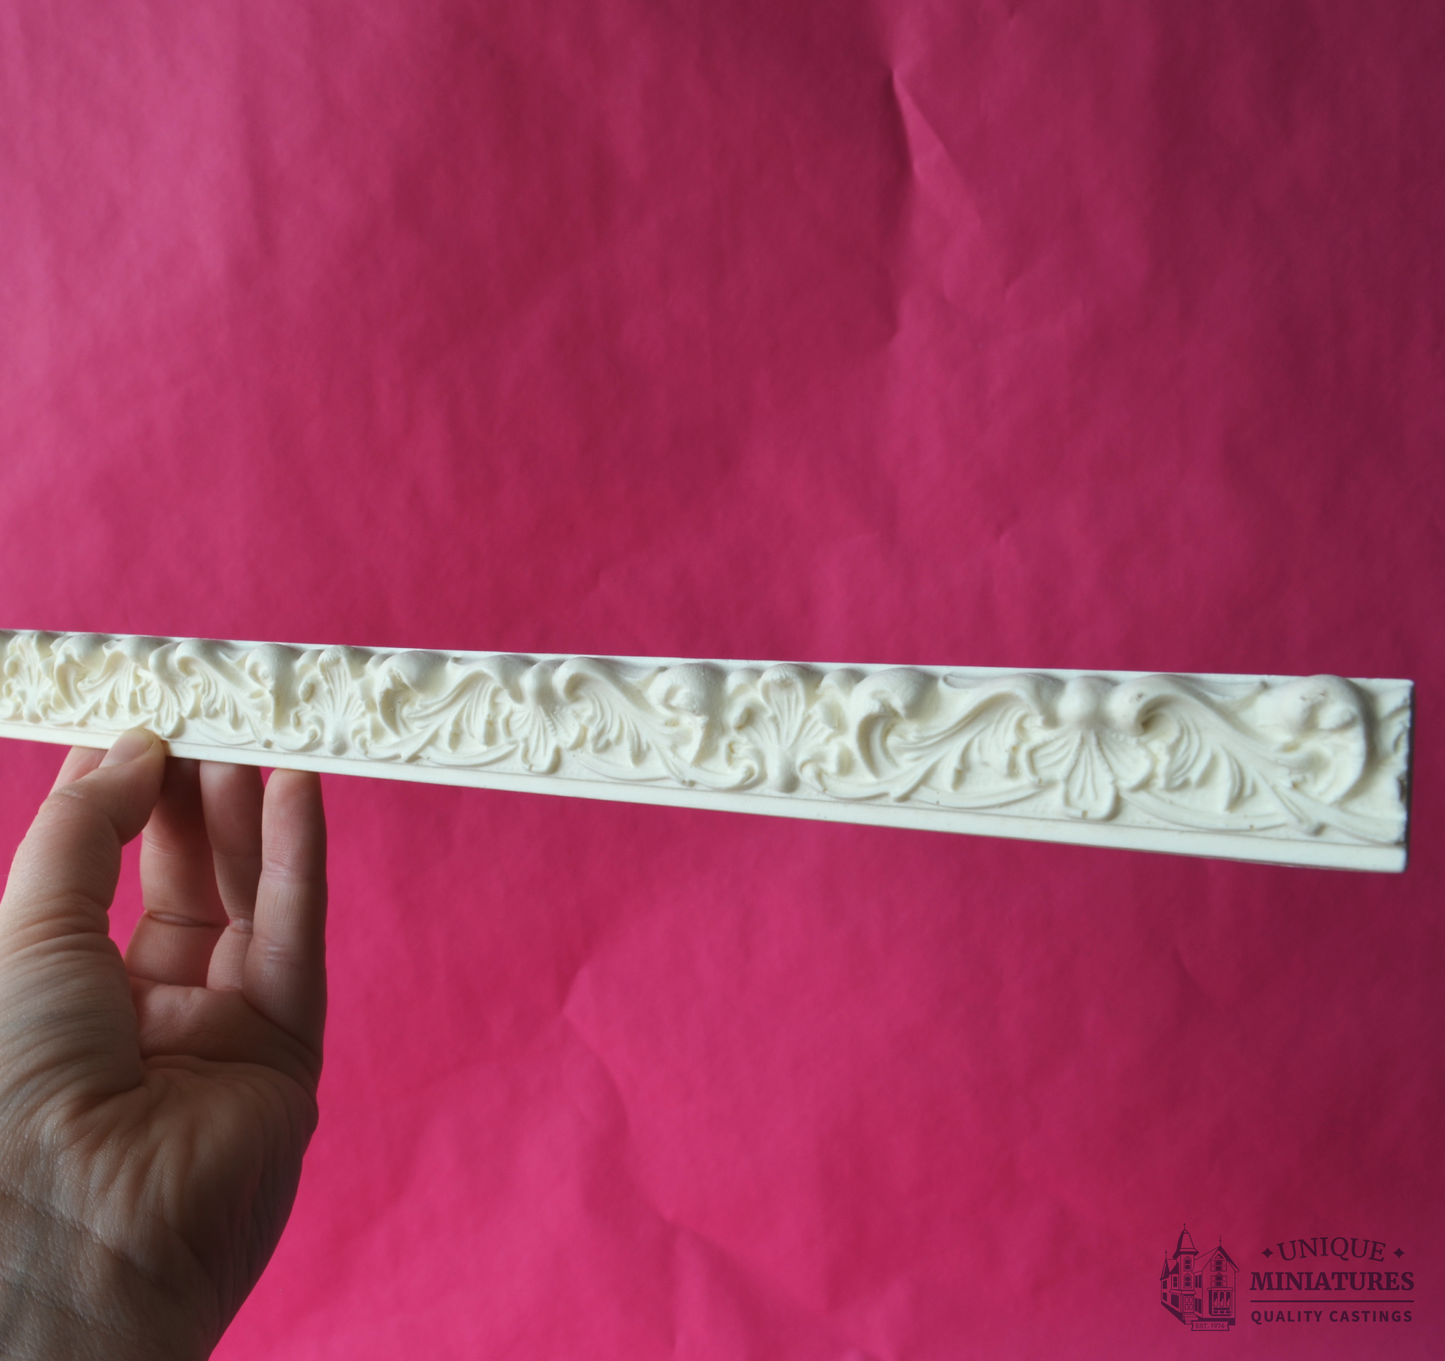 Wave and Shell Molding | 17 1/2" | Ornamentation for Dollhouse